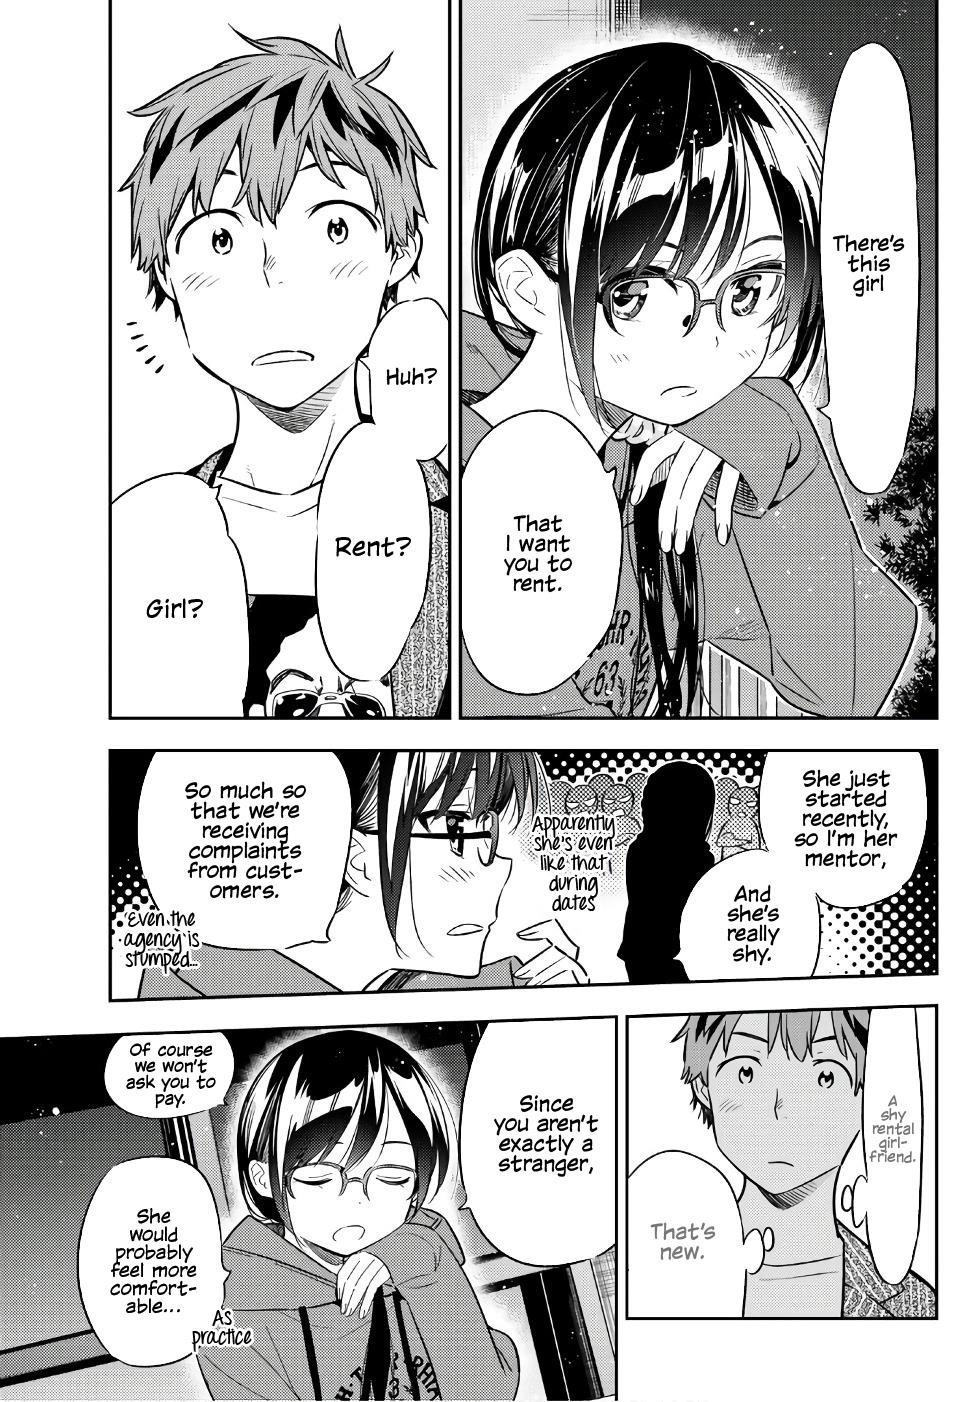 Rent A GirlFriend, Chapter 41 image 008